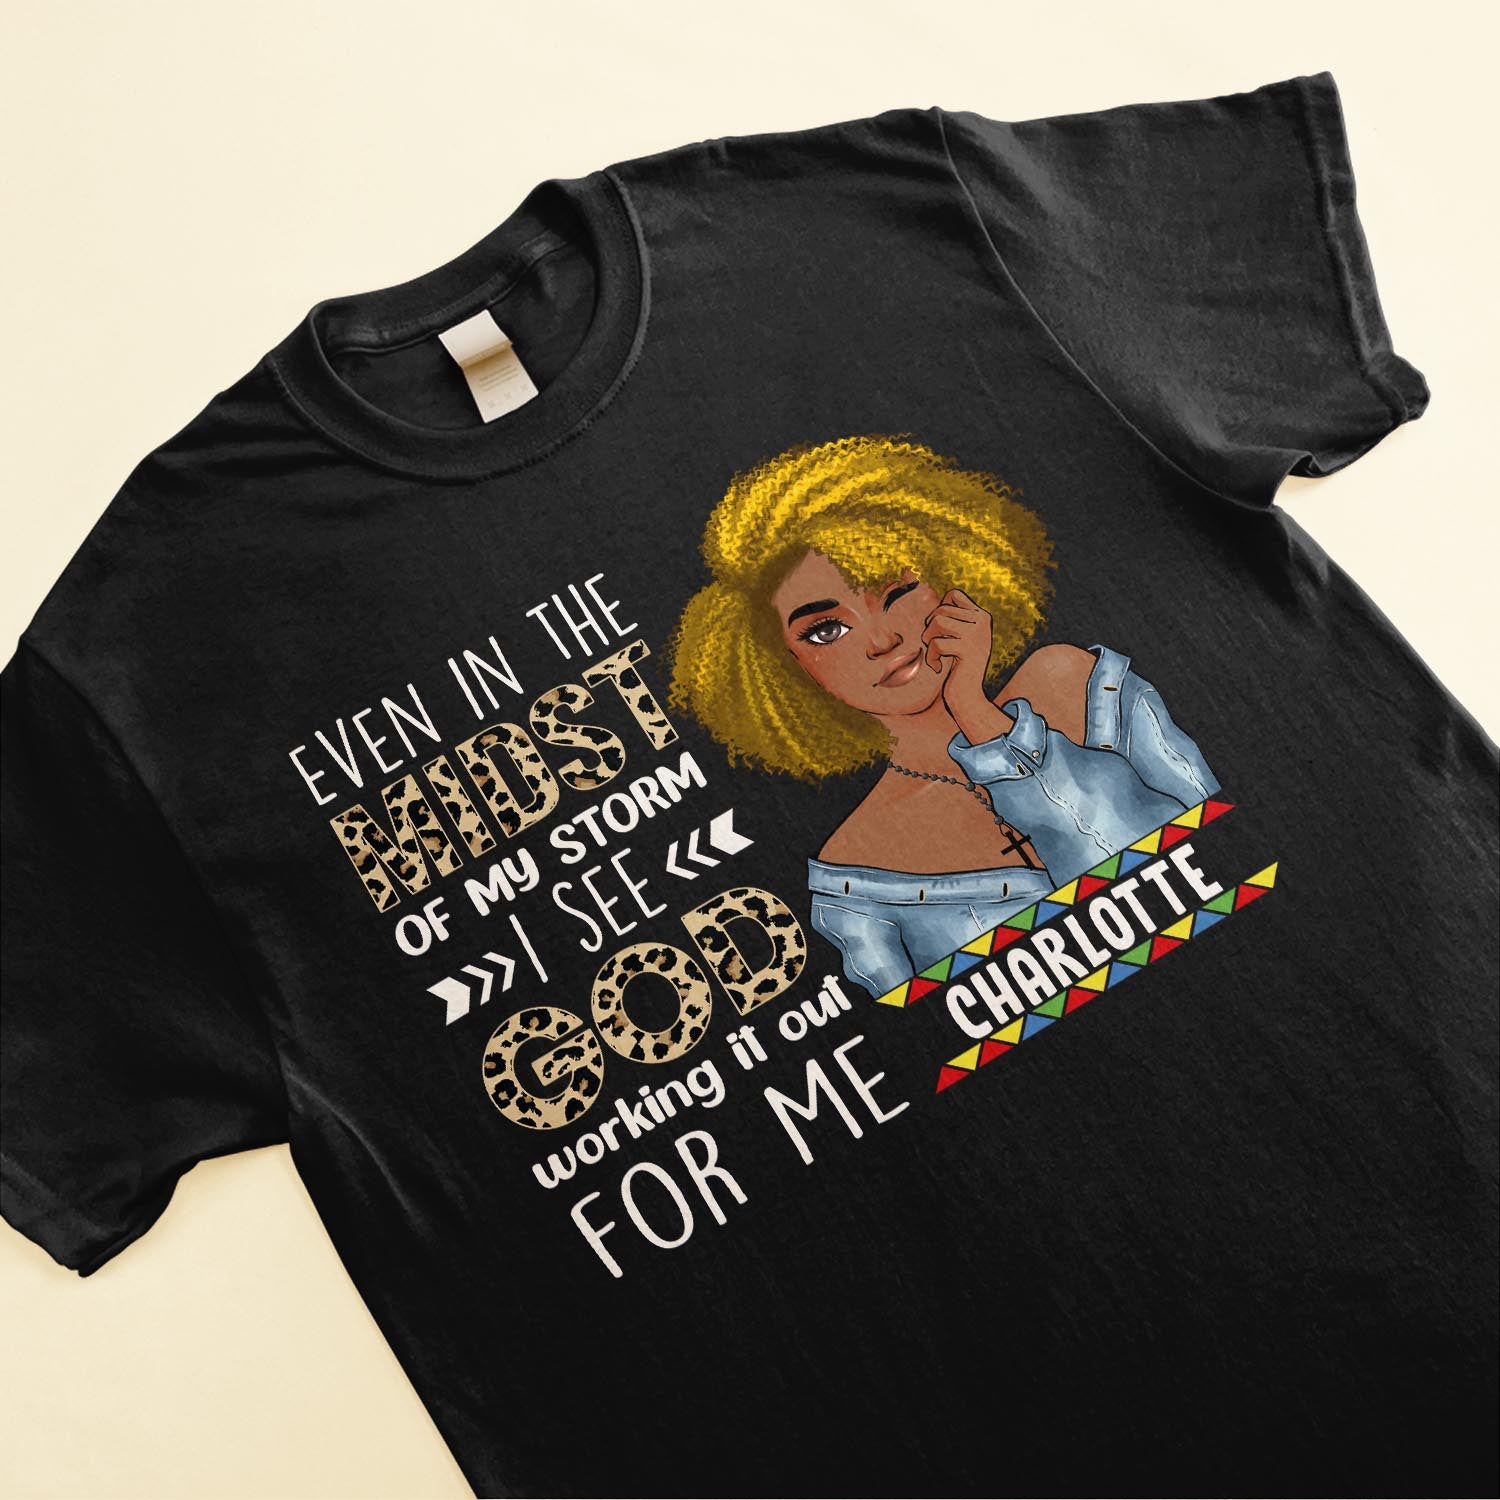 God Working It Out For Me - Personalized Shirt - Birthday Gift For Black Woman 